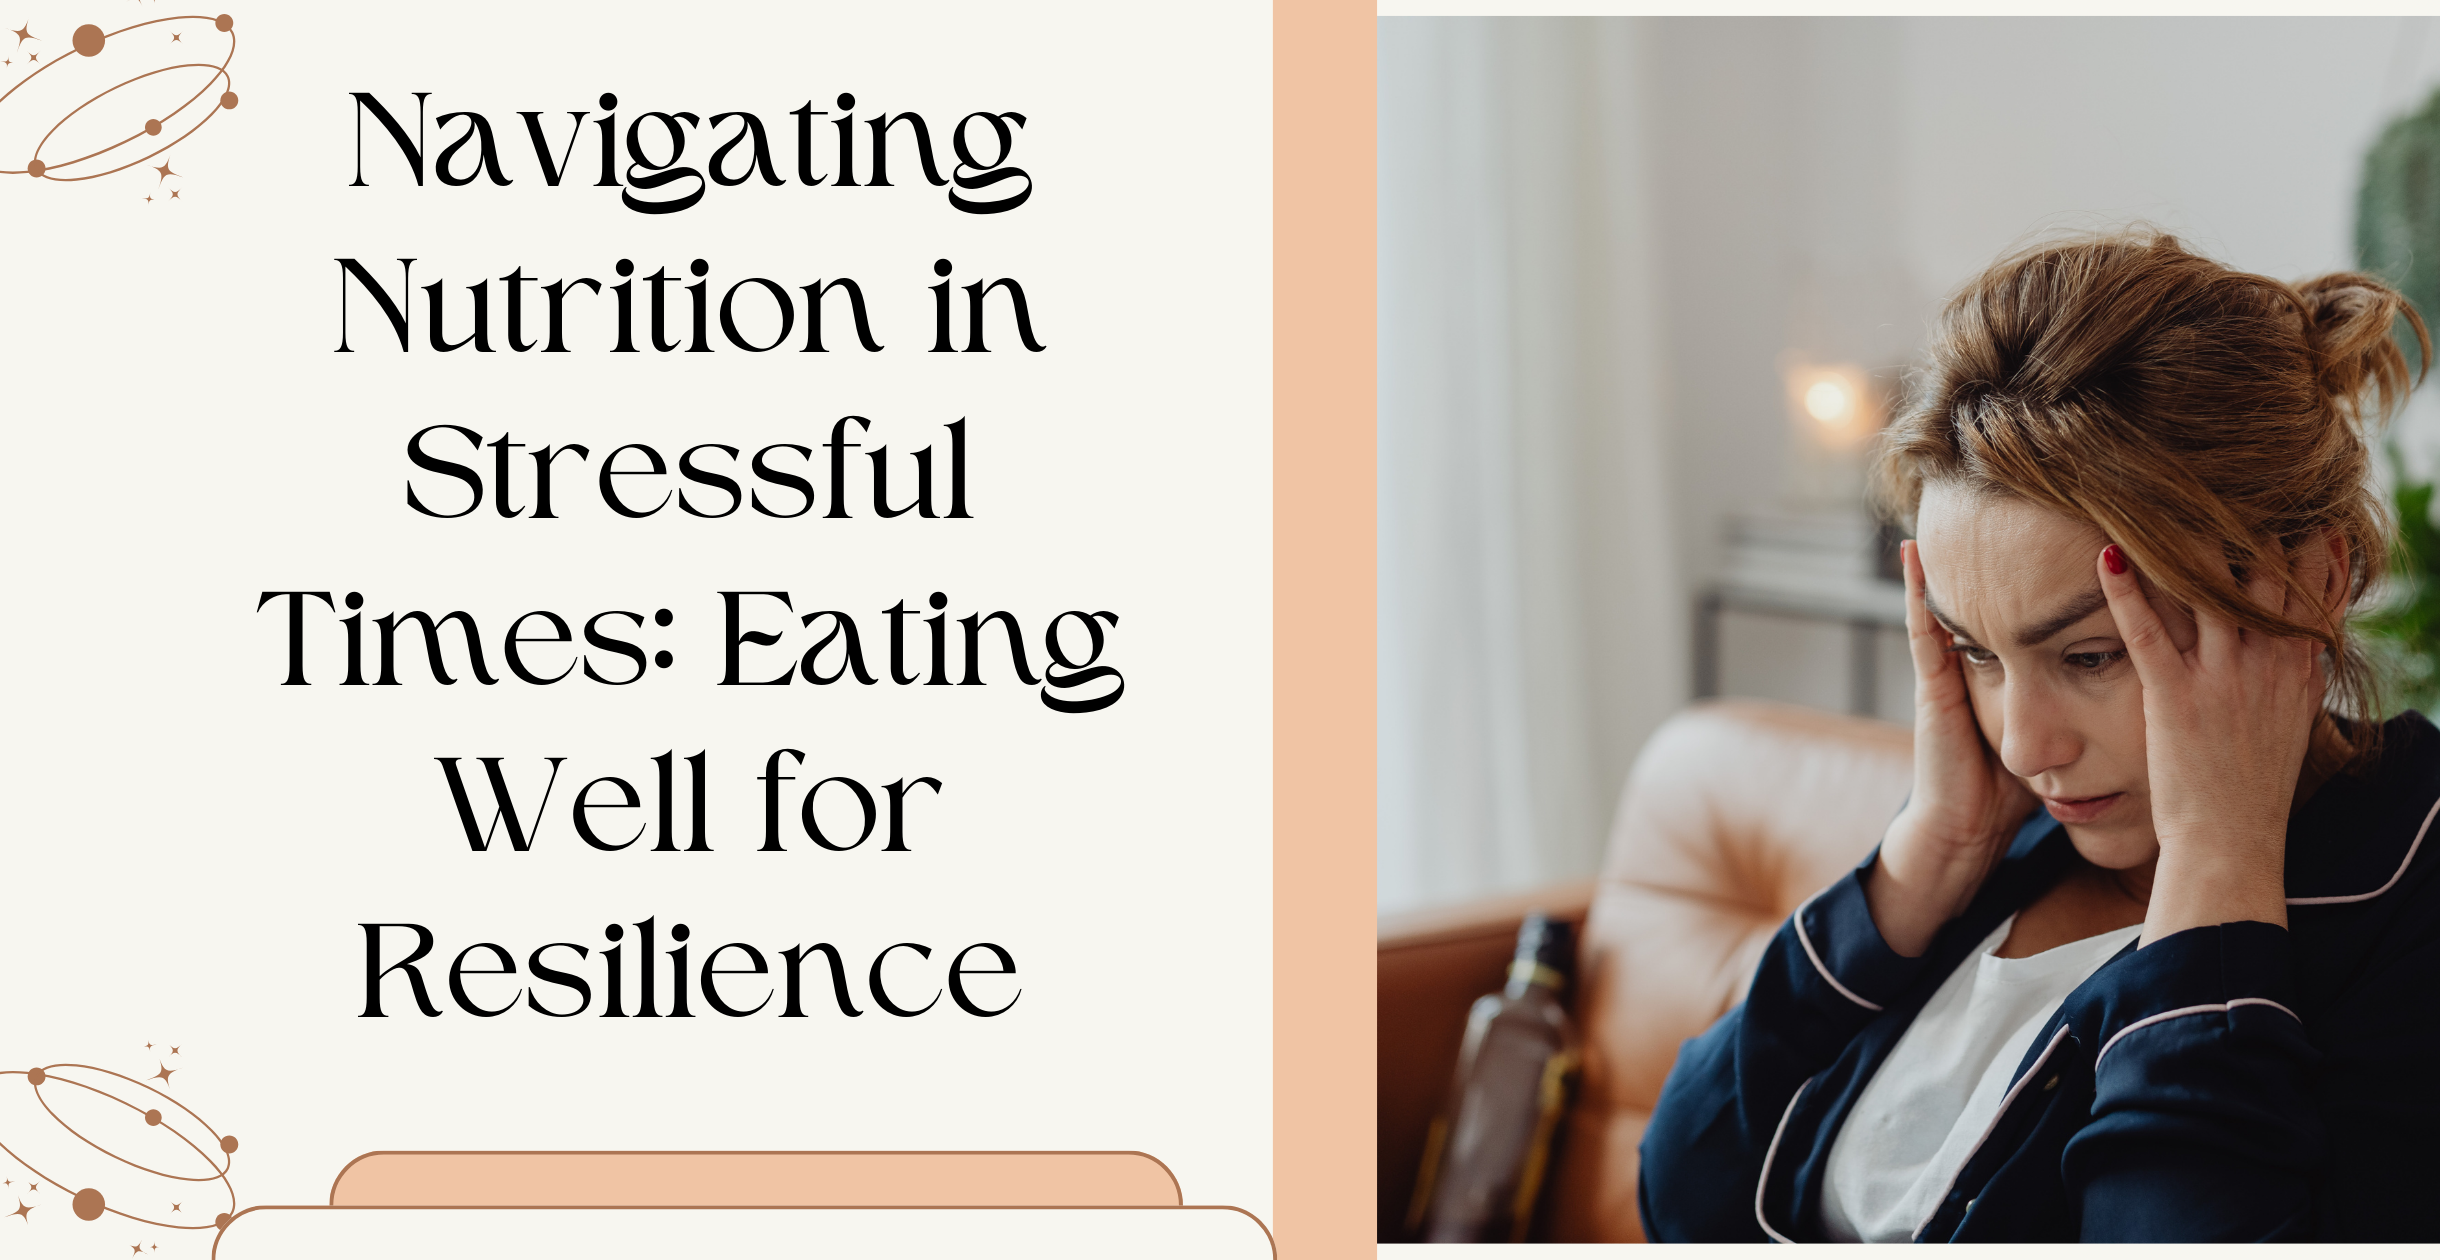 Navigating Nutrition in Stressful Times: Eating Well for Resilience